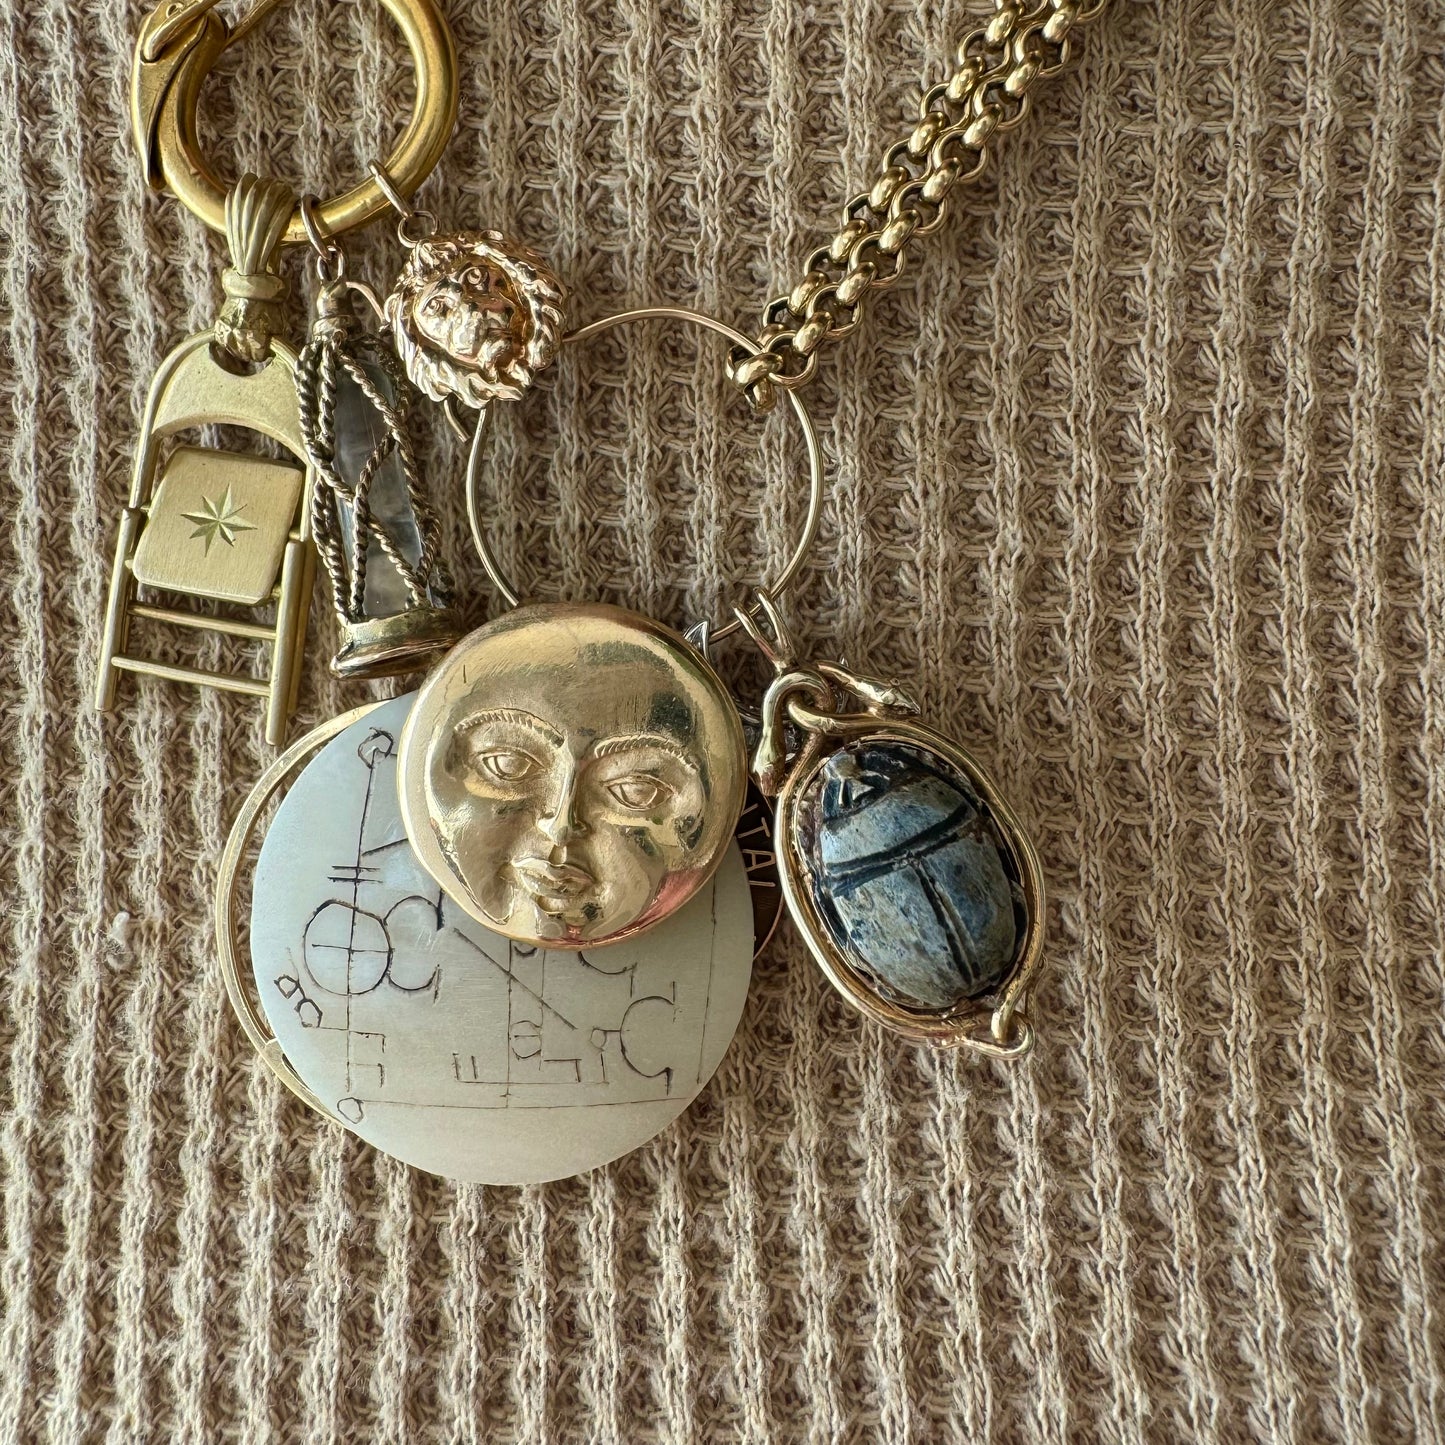 reworked A N T I Q U E // protected beetle / 14k and faience scarab and snakes / a vintage conversion pendant